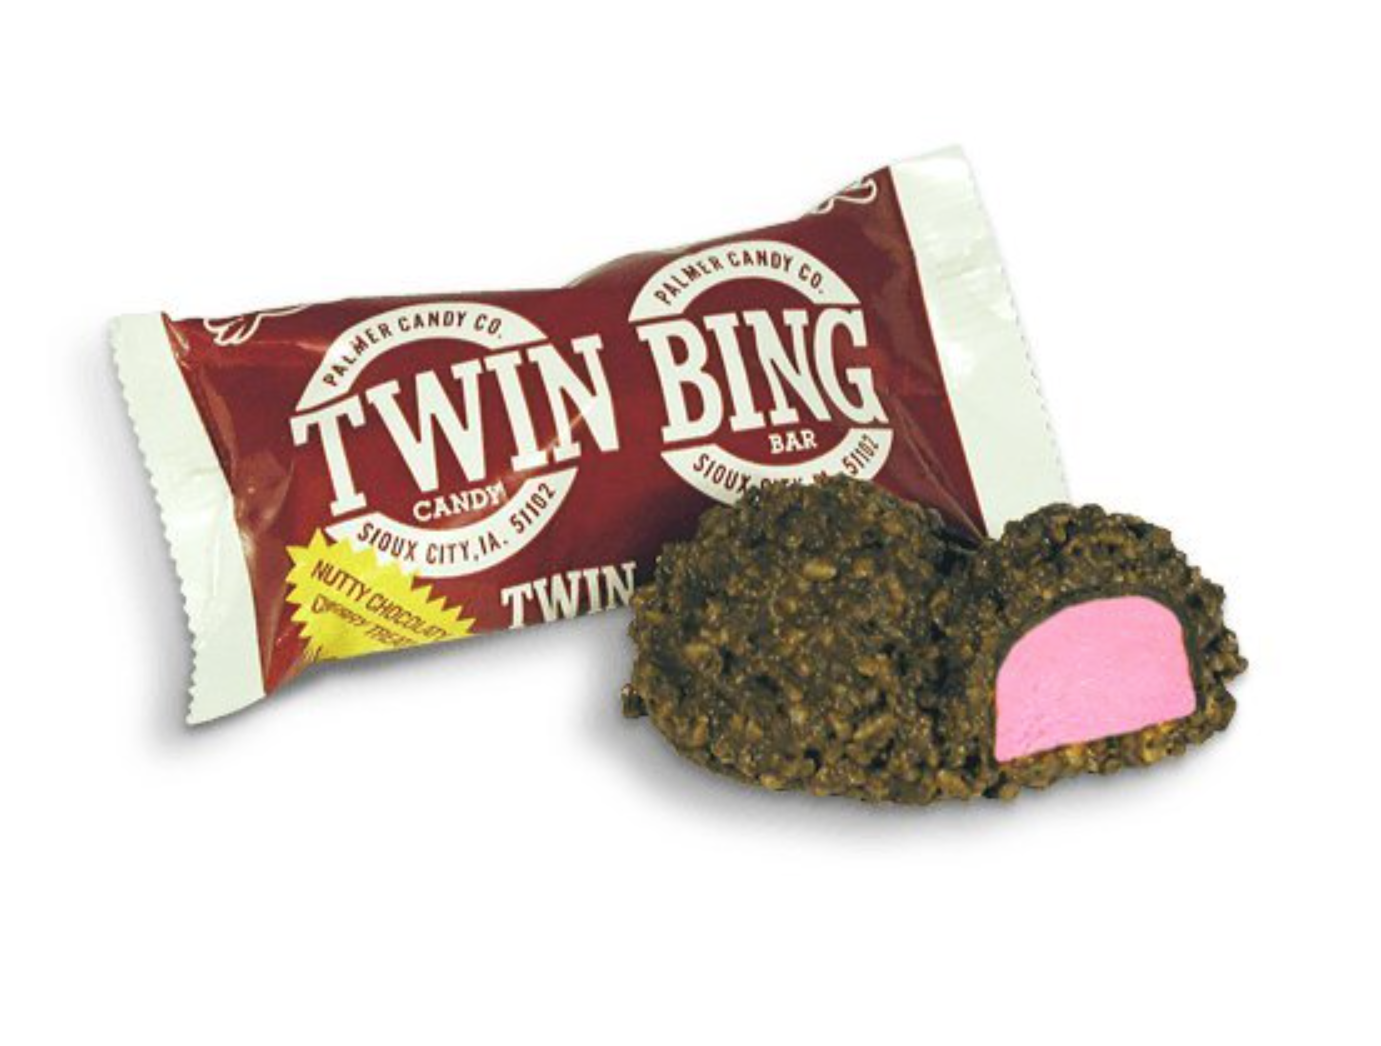 Pack of 6, Twin Bing Cherry Candy Bar By Palmer Candy, 1 7/8 oz